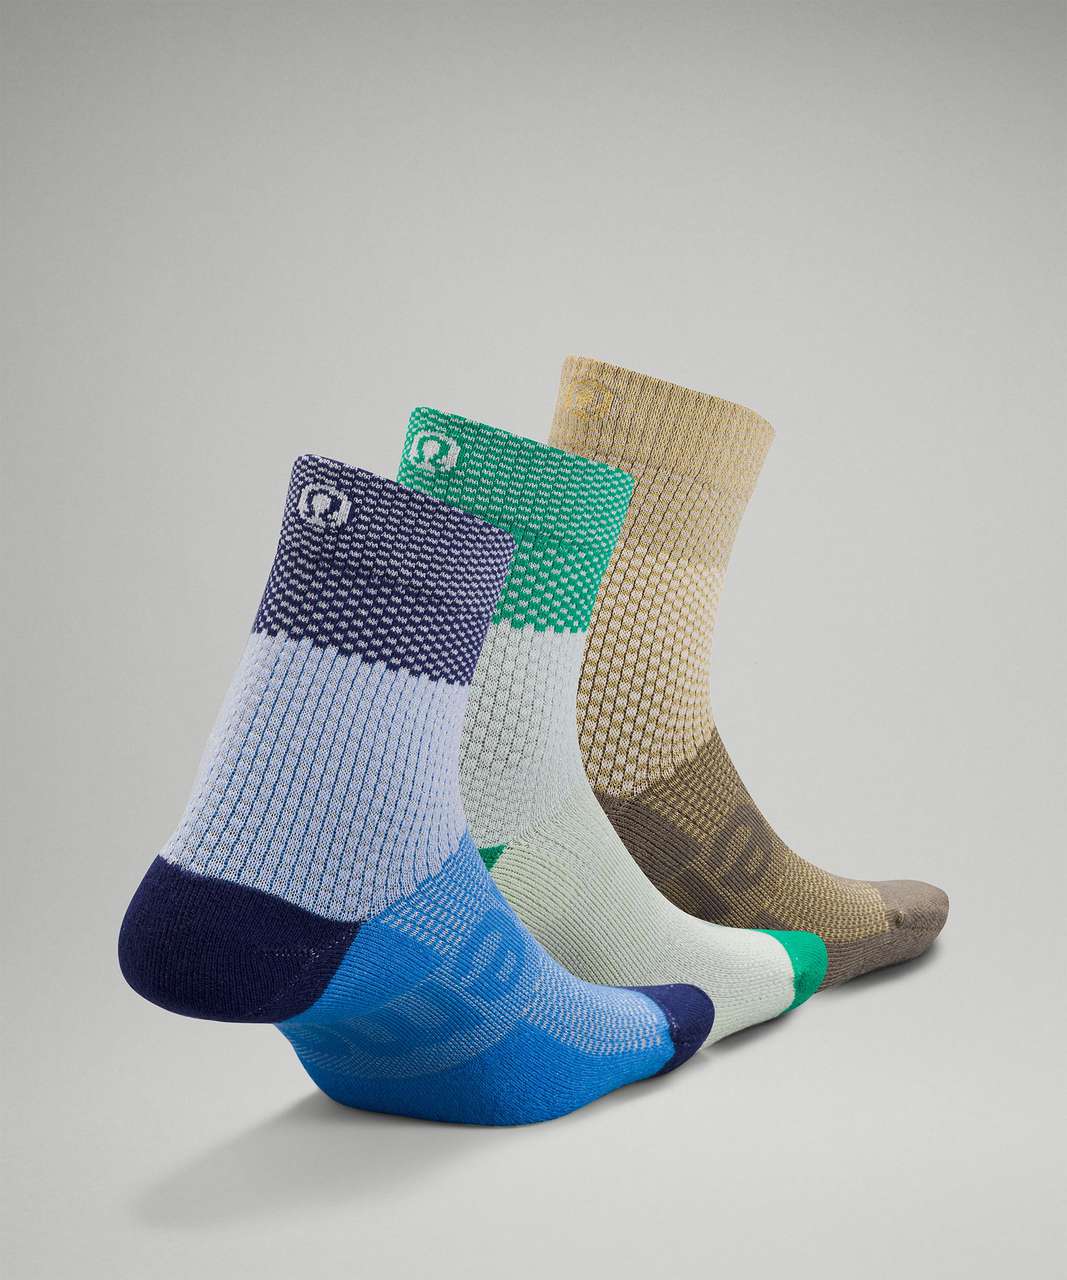 Lululemon Daily Stride Mid Crew Sock *3 Pack - Blue Nile / Arctic Mint / Rover